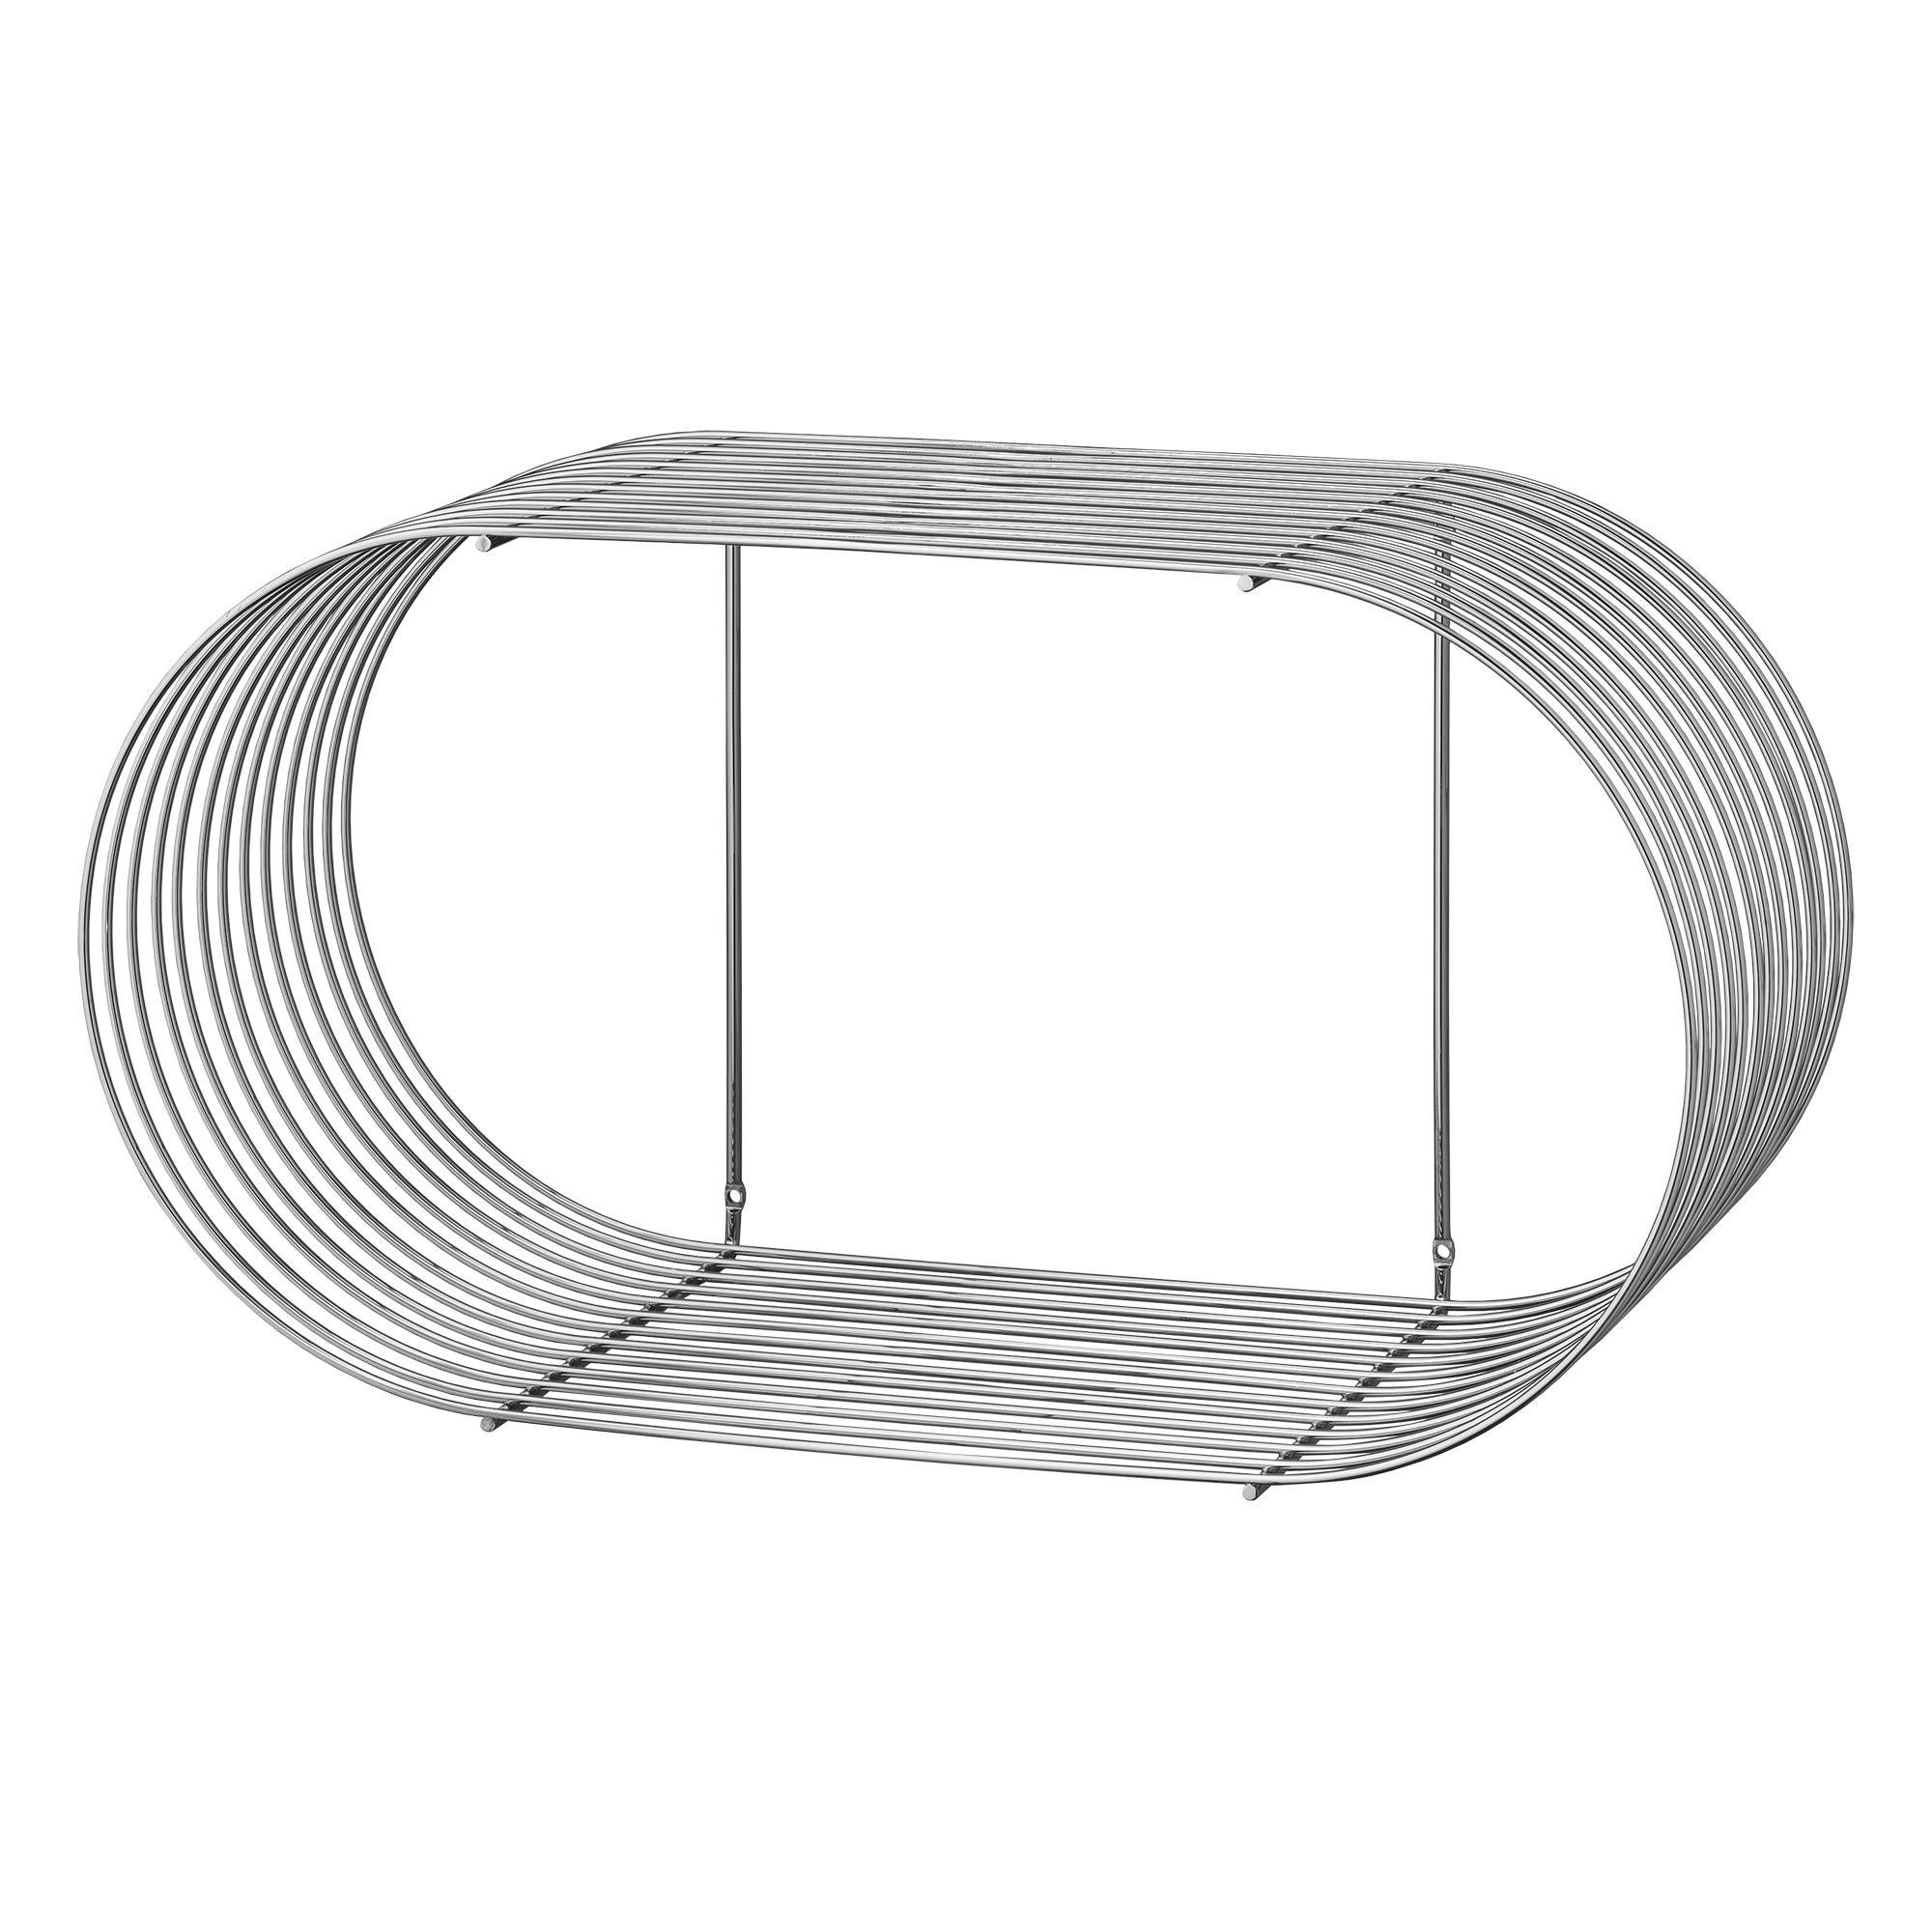 Large silver contemporary shelf
Dimensions: L 61.4 x W 25.3 x H 33 cm 
Materials: Steel.
Also available in Gold and Black. 


It is not always easy to determine what makes a design become an icon, but it seems the Curva shelf has accomplished